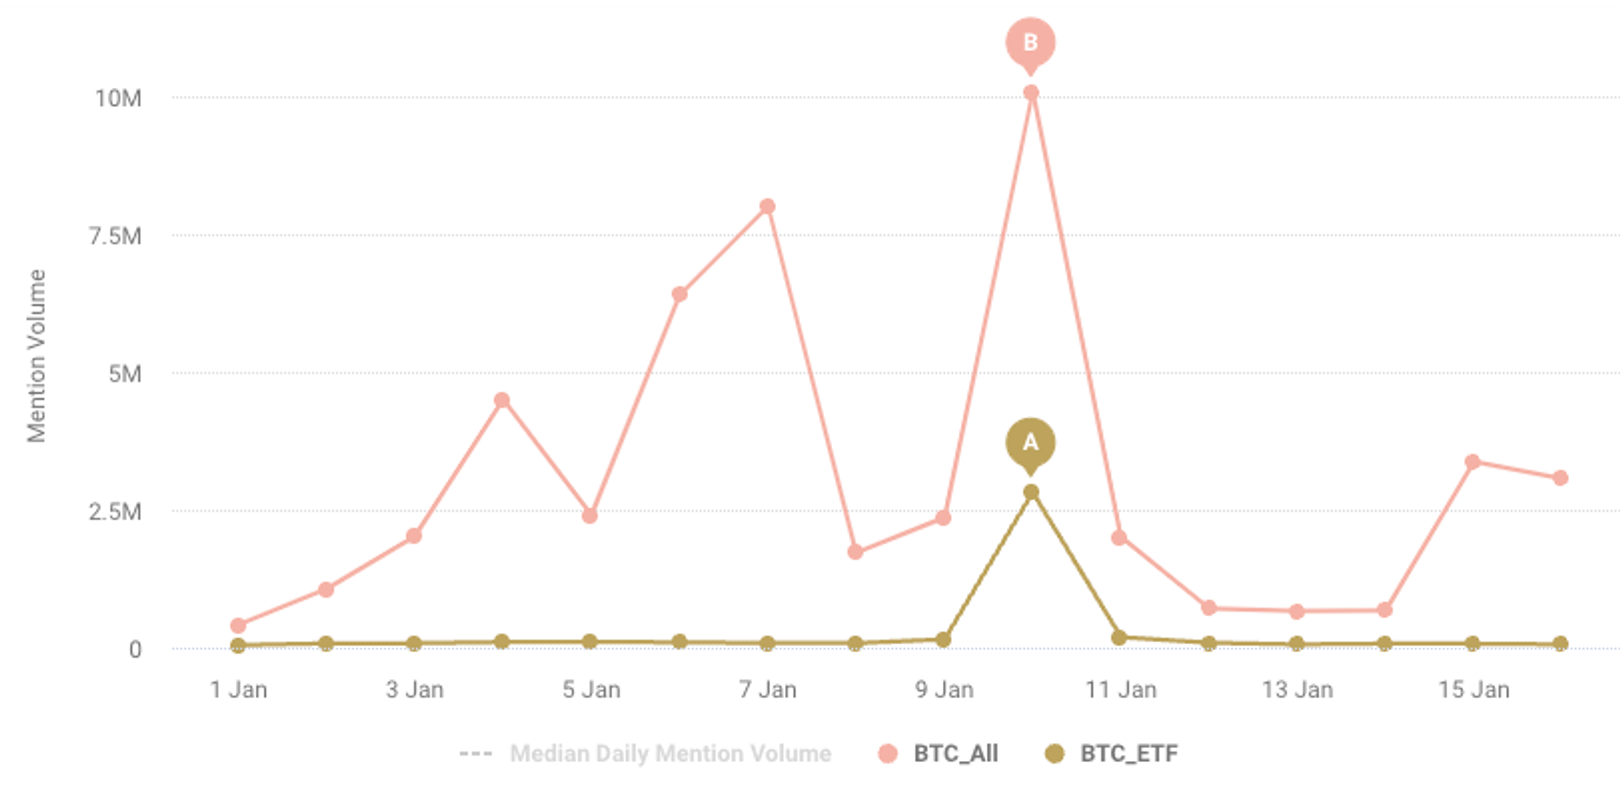 A line chart shows social media mentions of Bitcoin and its ETFs, peaking on January 10.